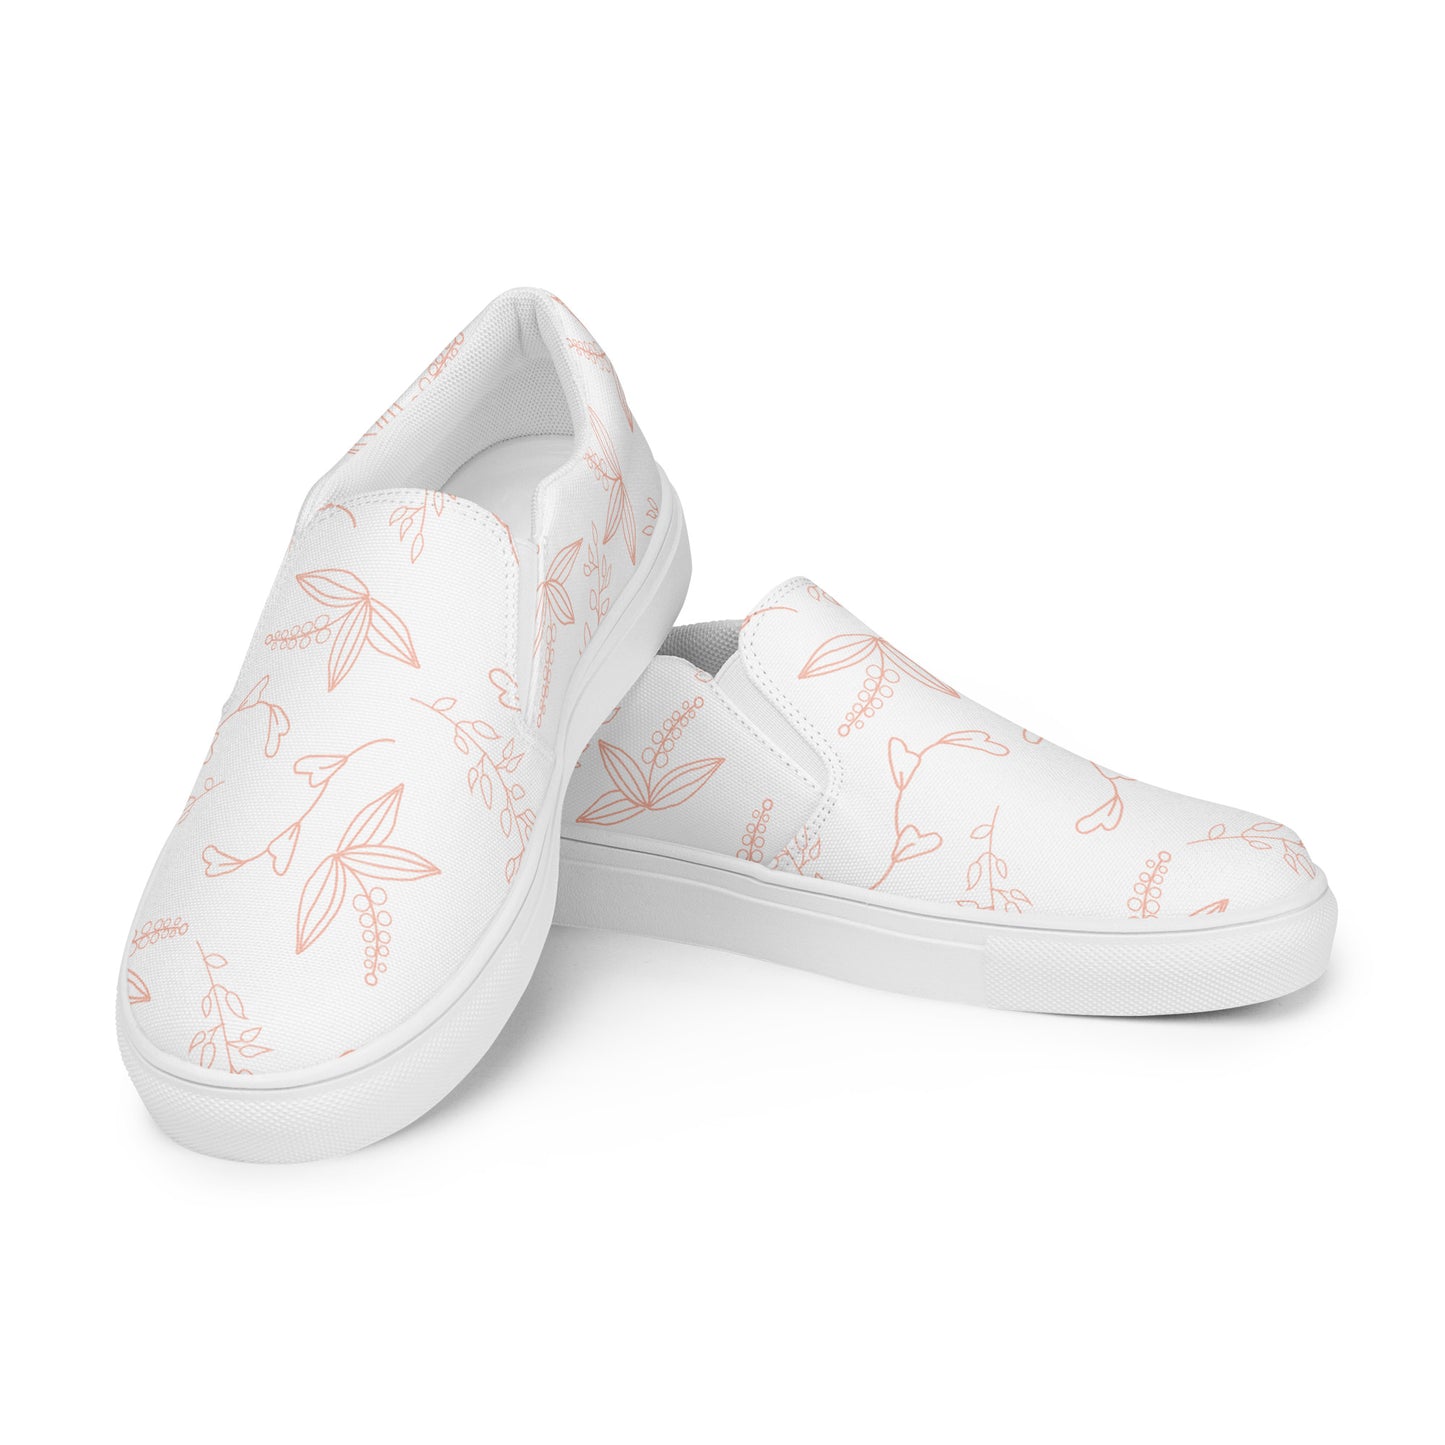 White Floral - Sustainably Made Women's  Slip-On Canvas Shoes